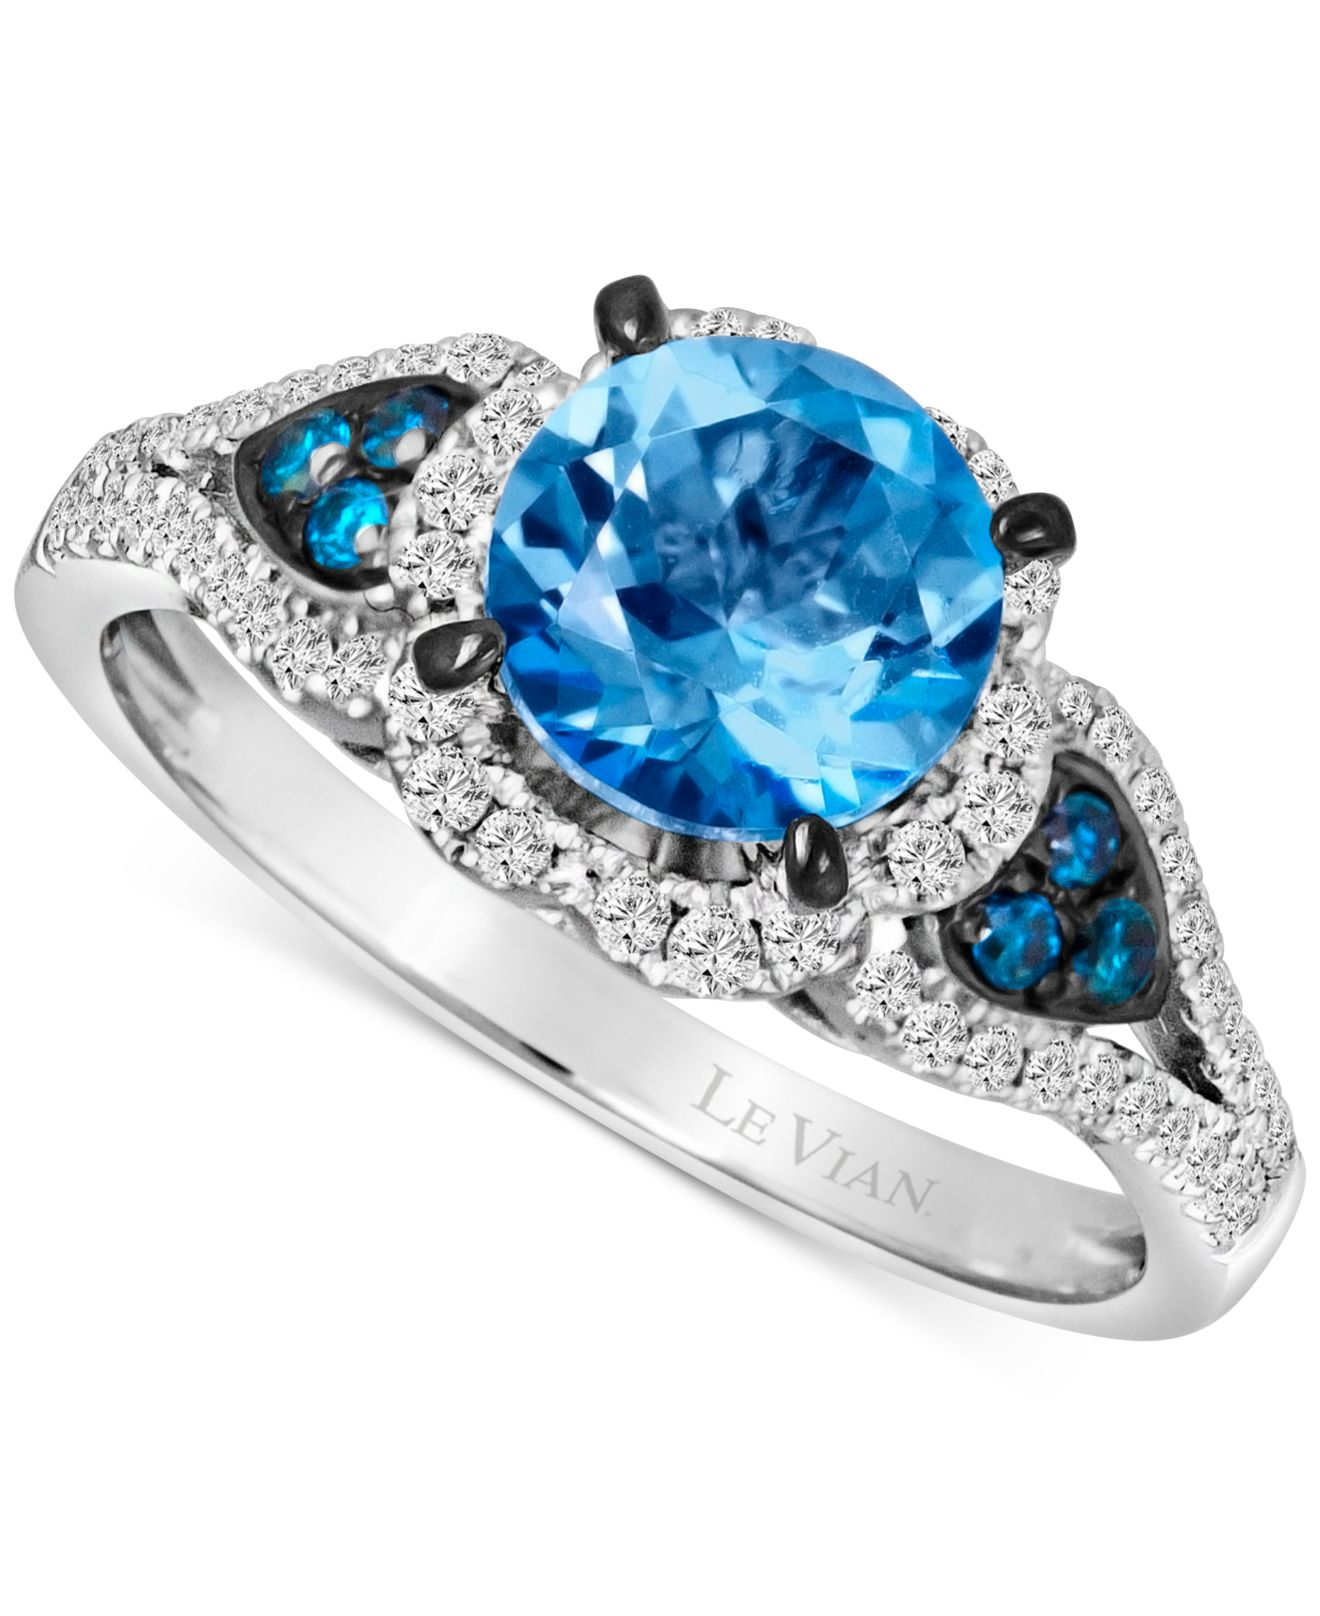 Le Vian Blue Topaz (11/5 Ct. T.w.) And Diamond (3/8 Ct. T.w.) Ring In 14k White Gold Lyst